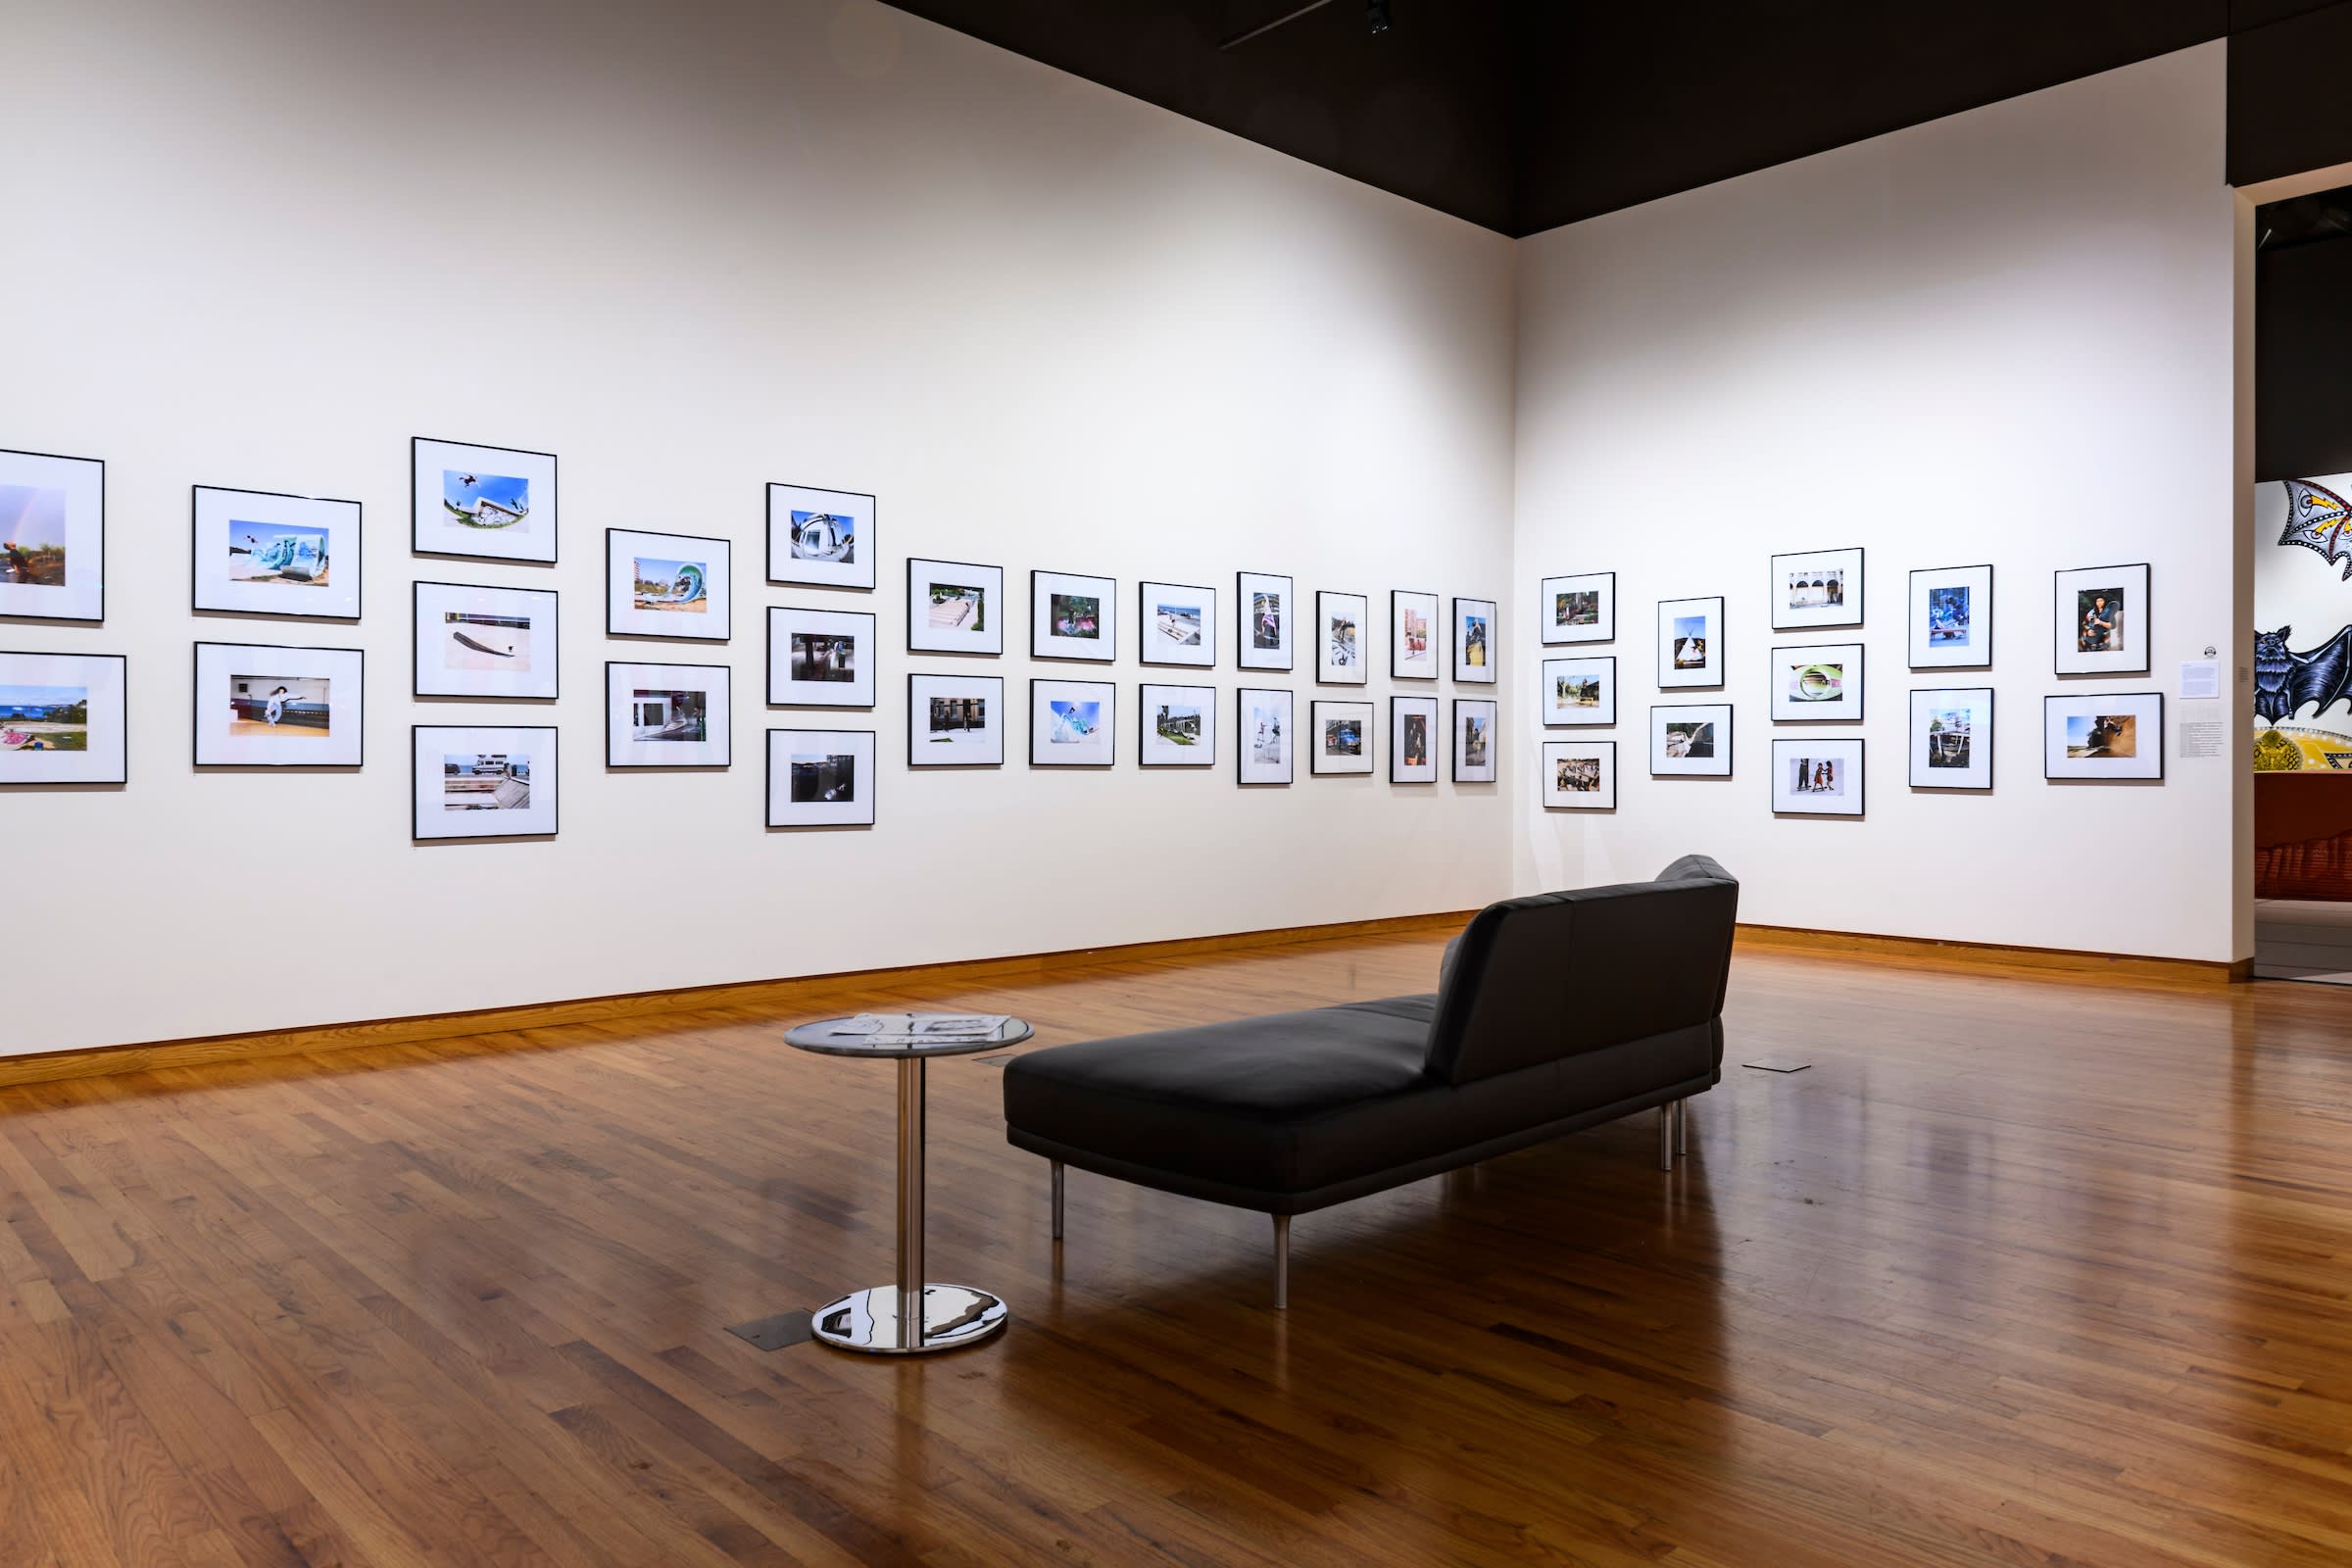 Installation view: Inclusive exhibition at the Fort Wayne Museum of Art.